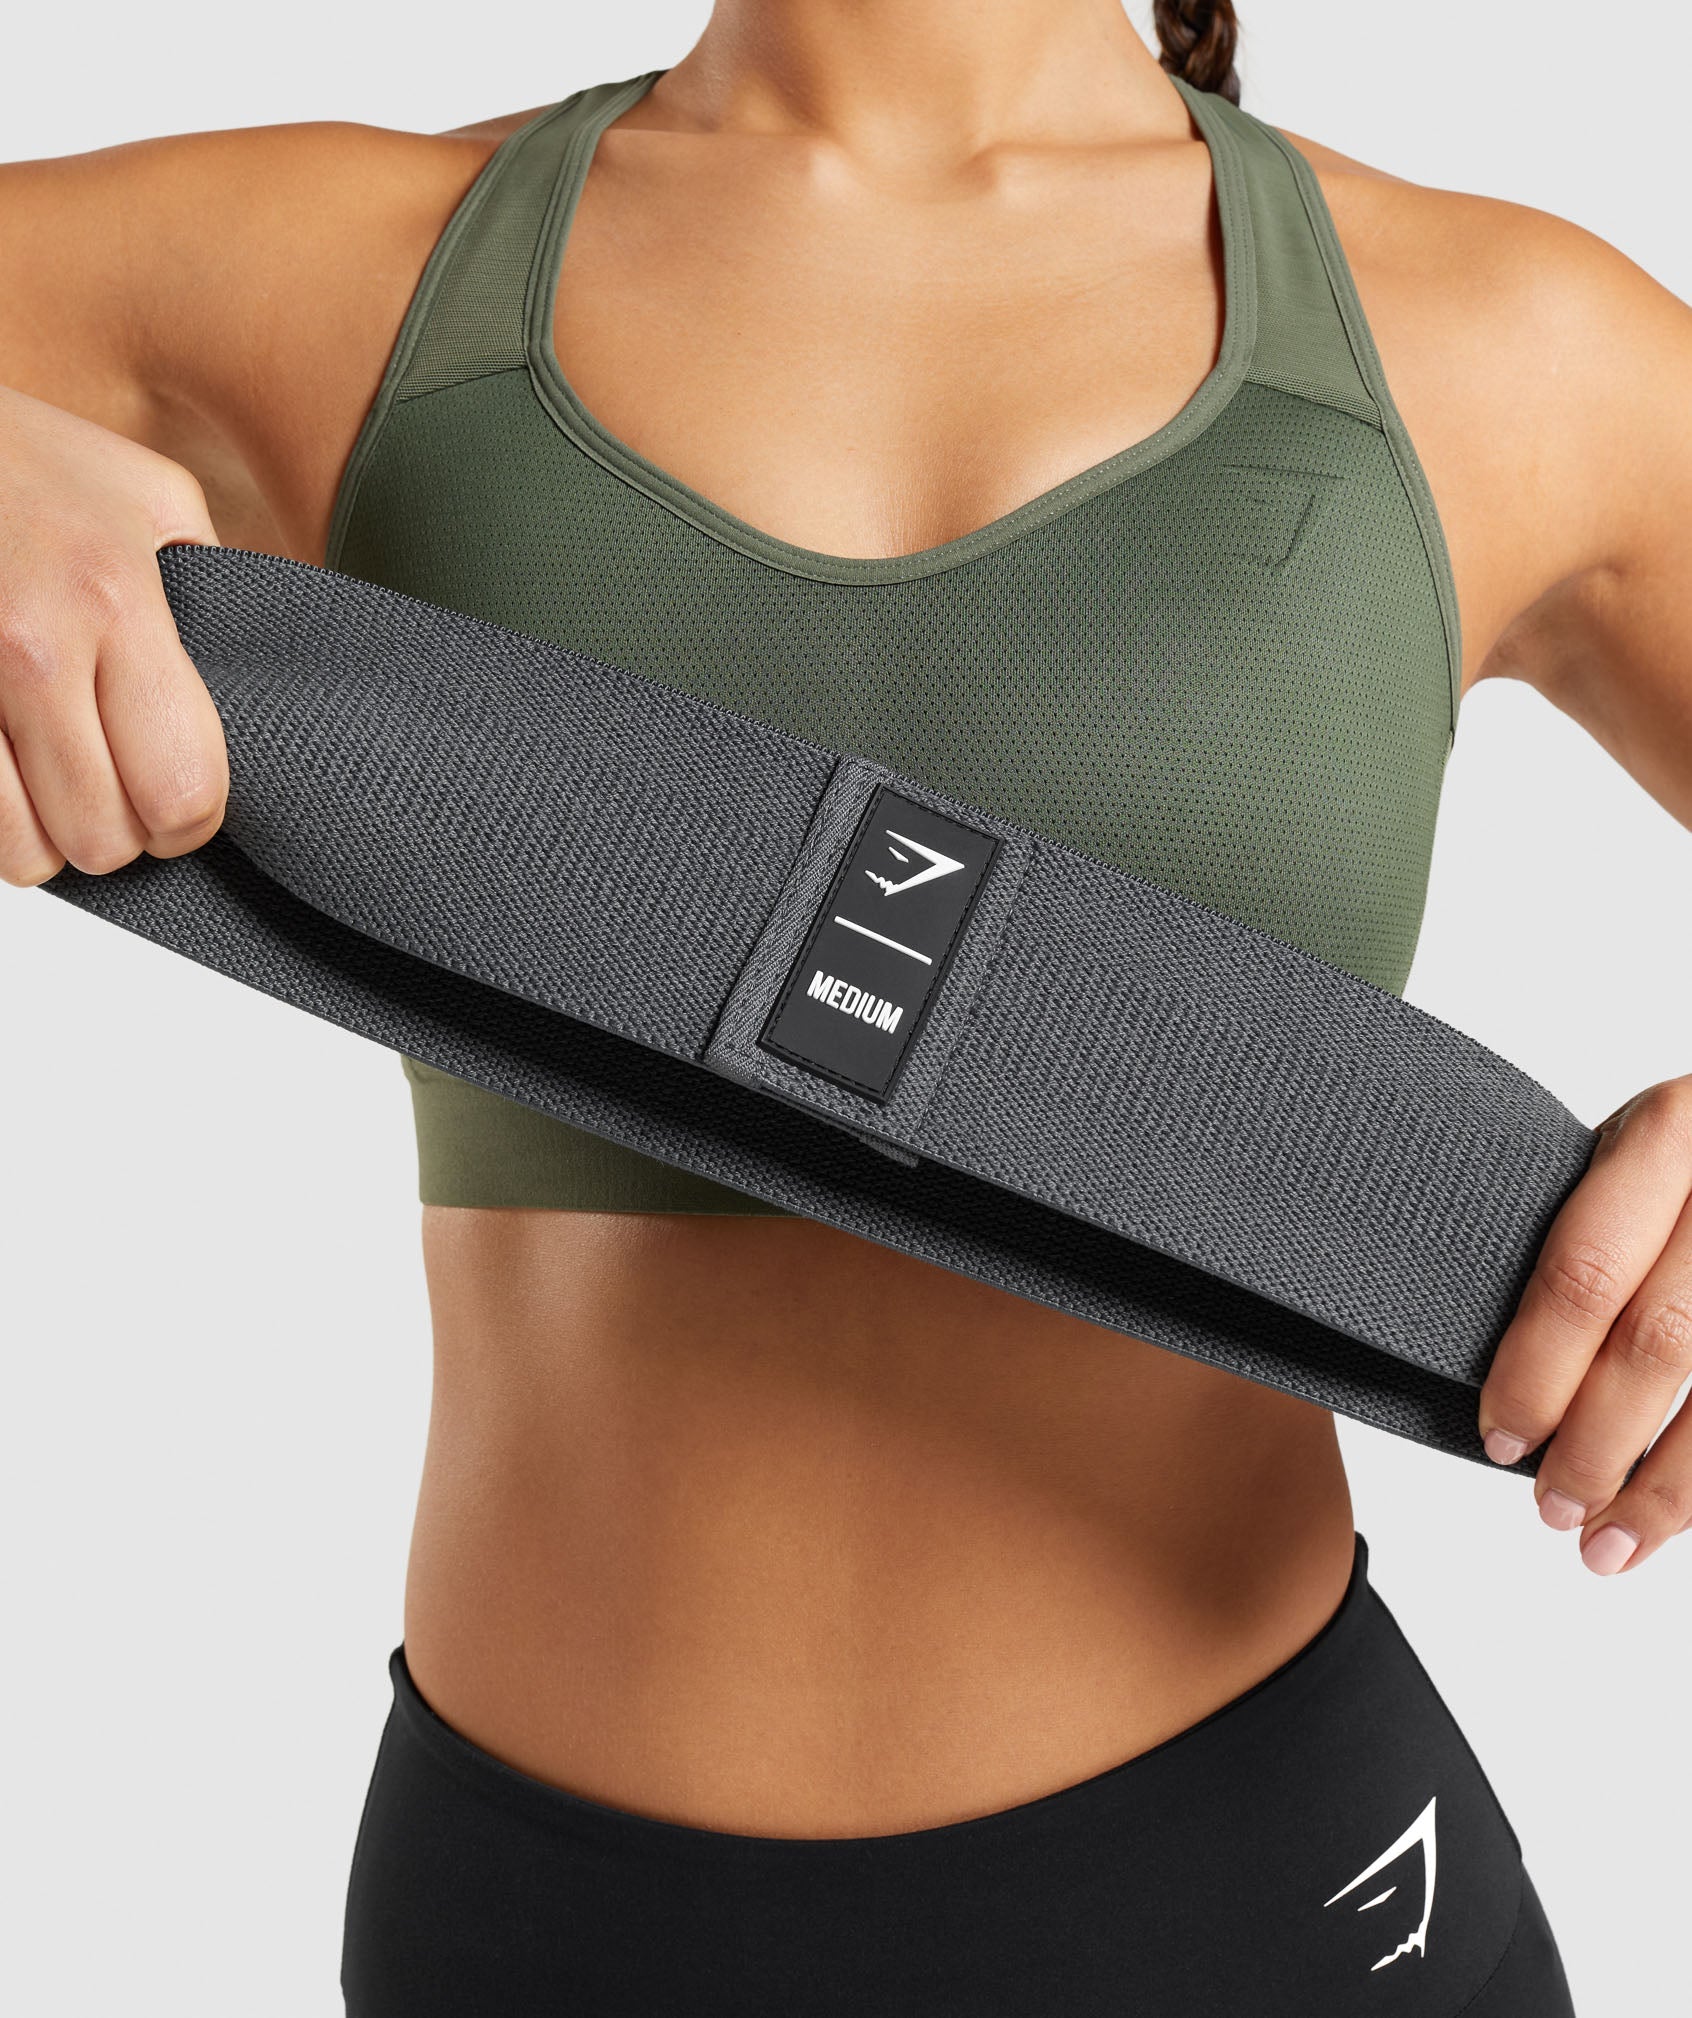 Medium Glute Band in Charcoal Grey - view 1